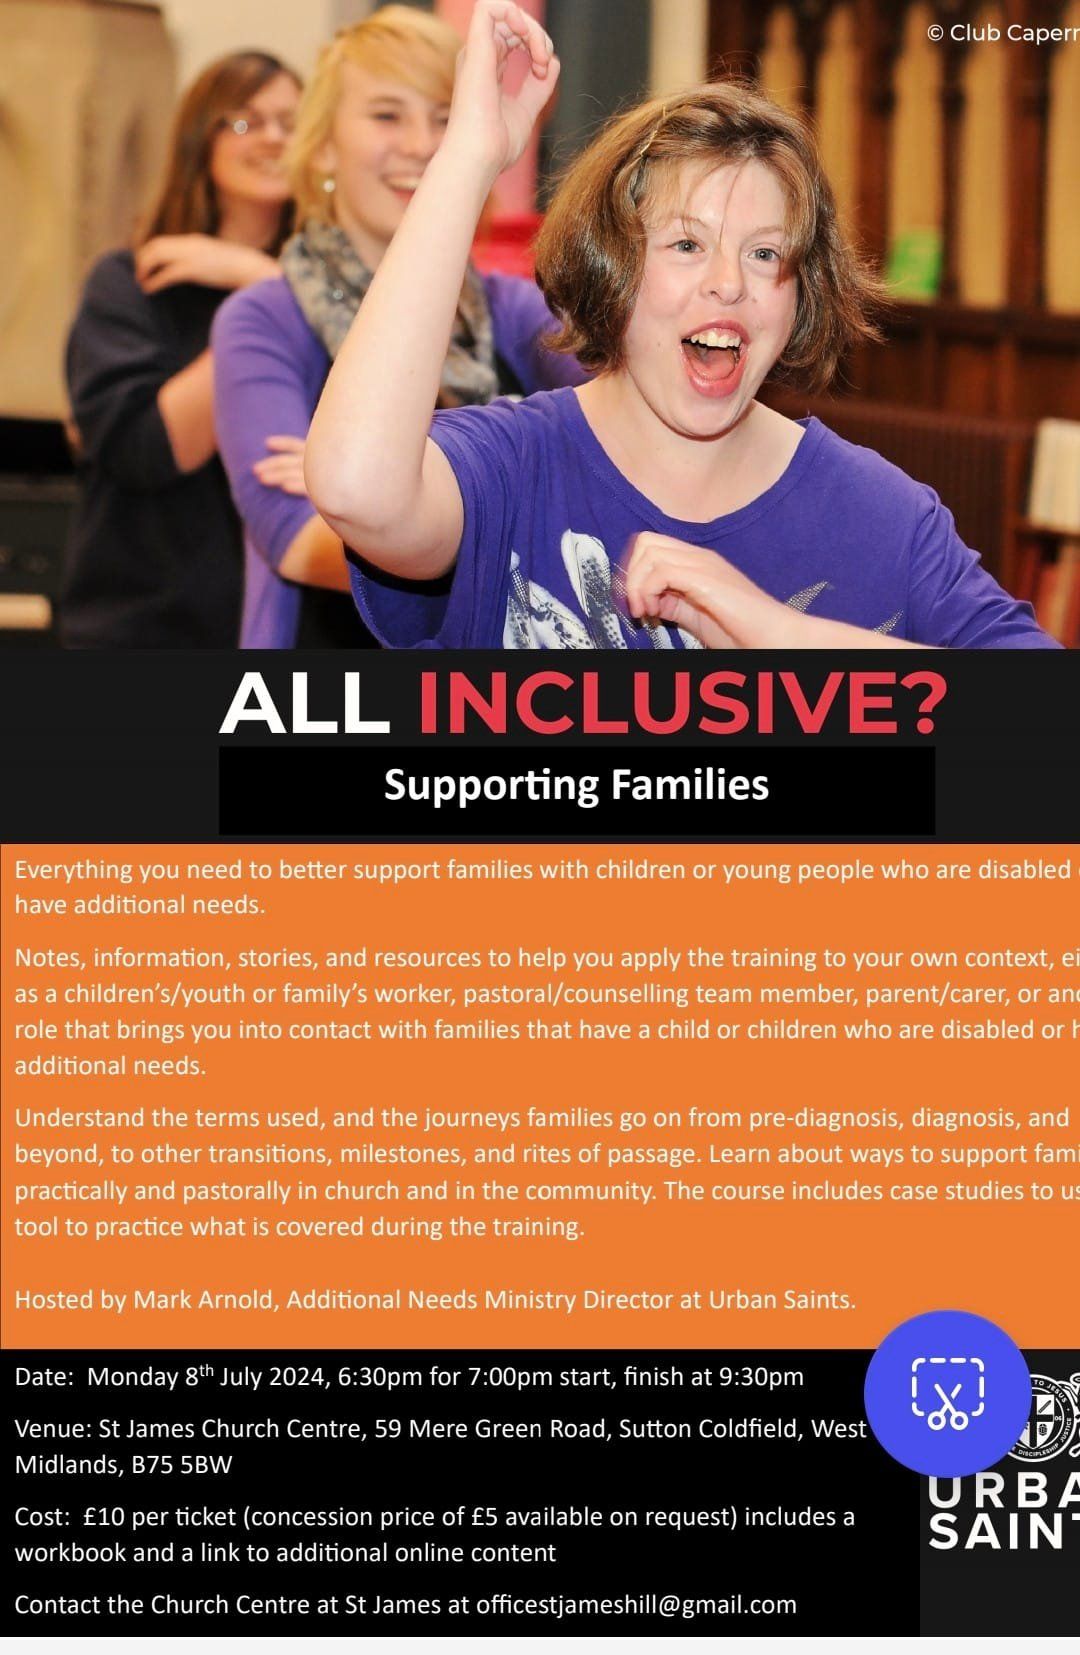 All Inclusive - Supporting Families